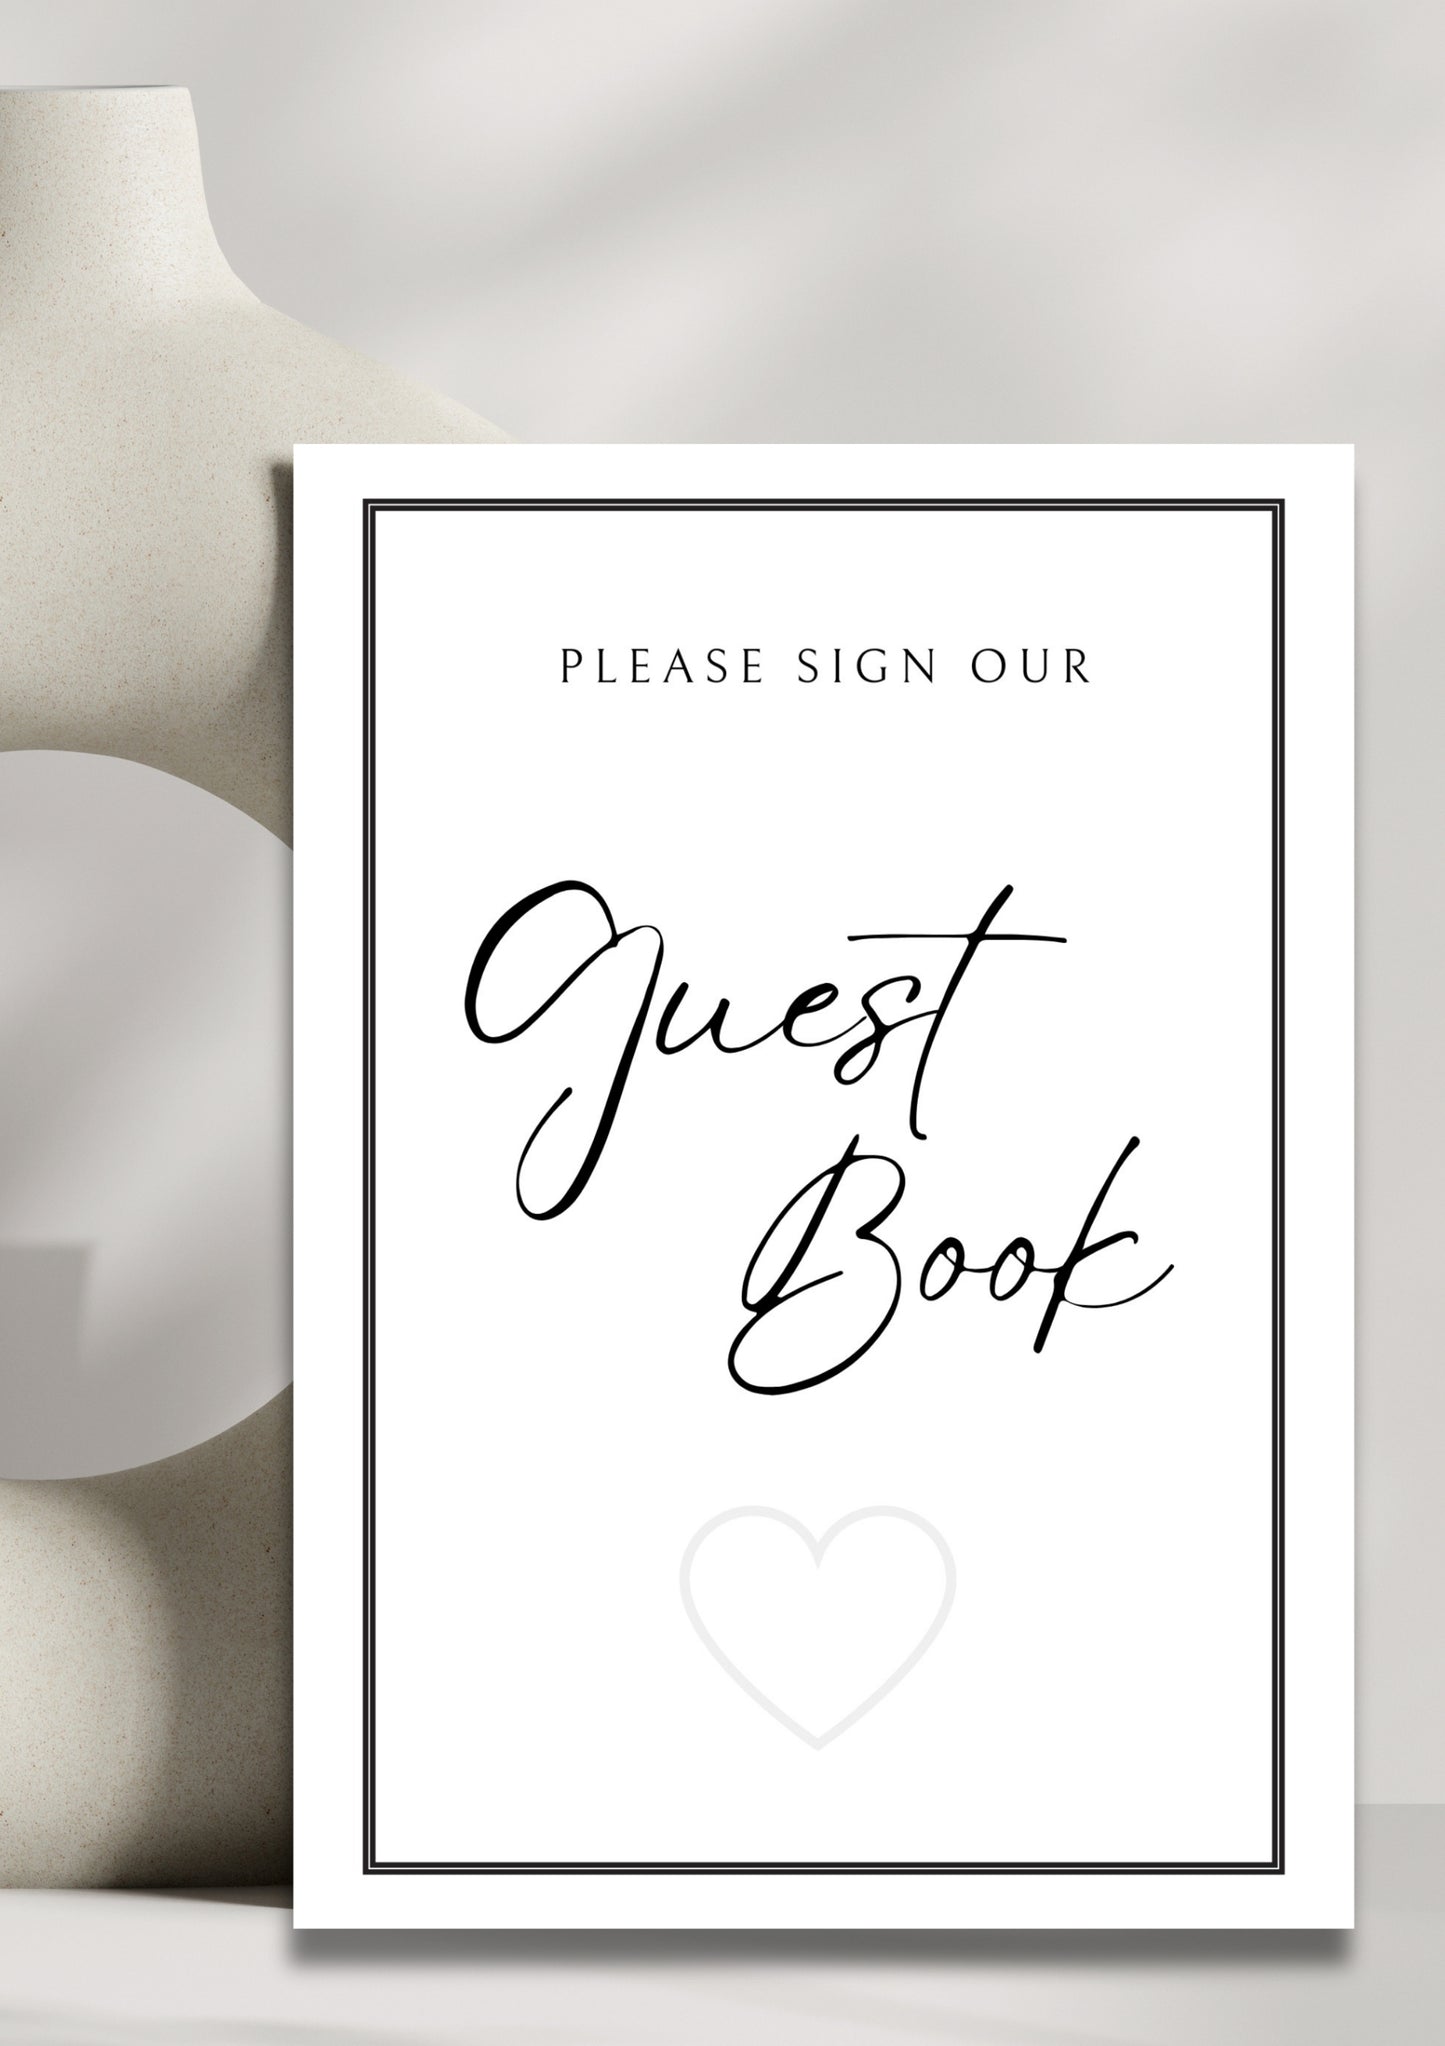 White stone collection - Guestbook sign